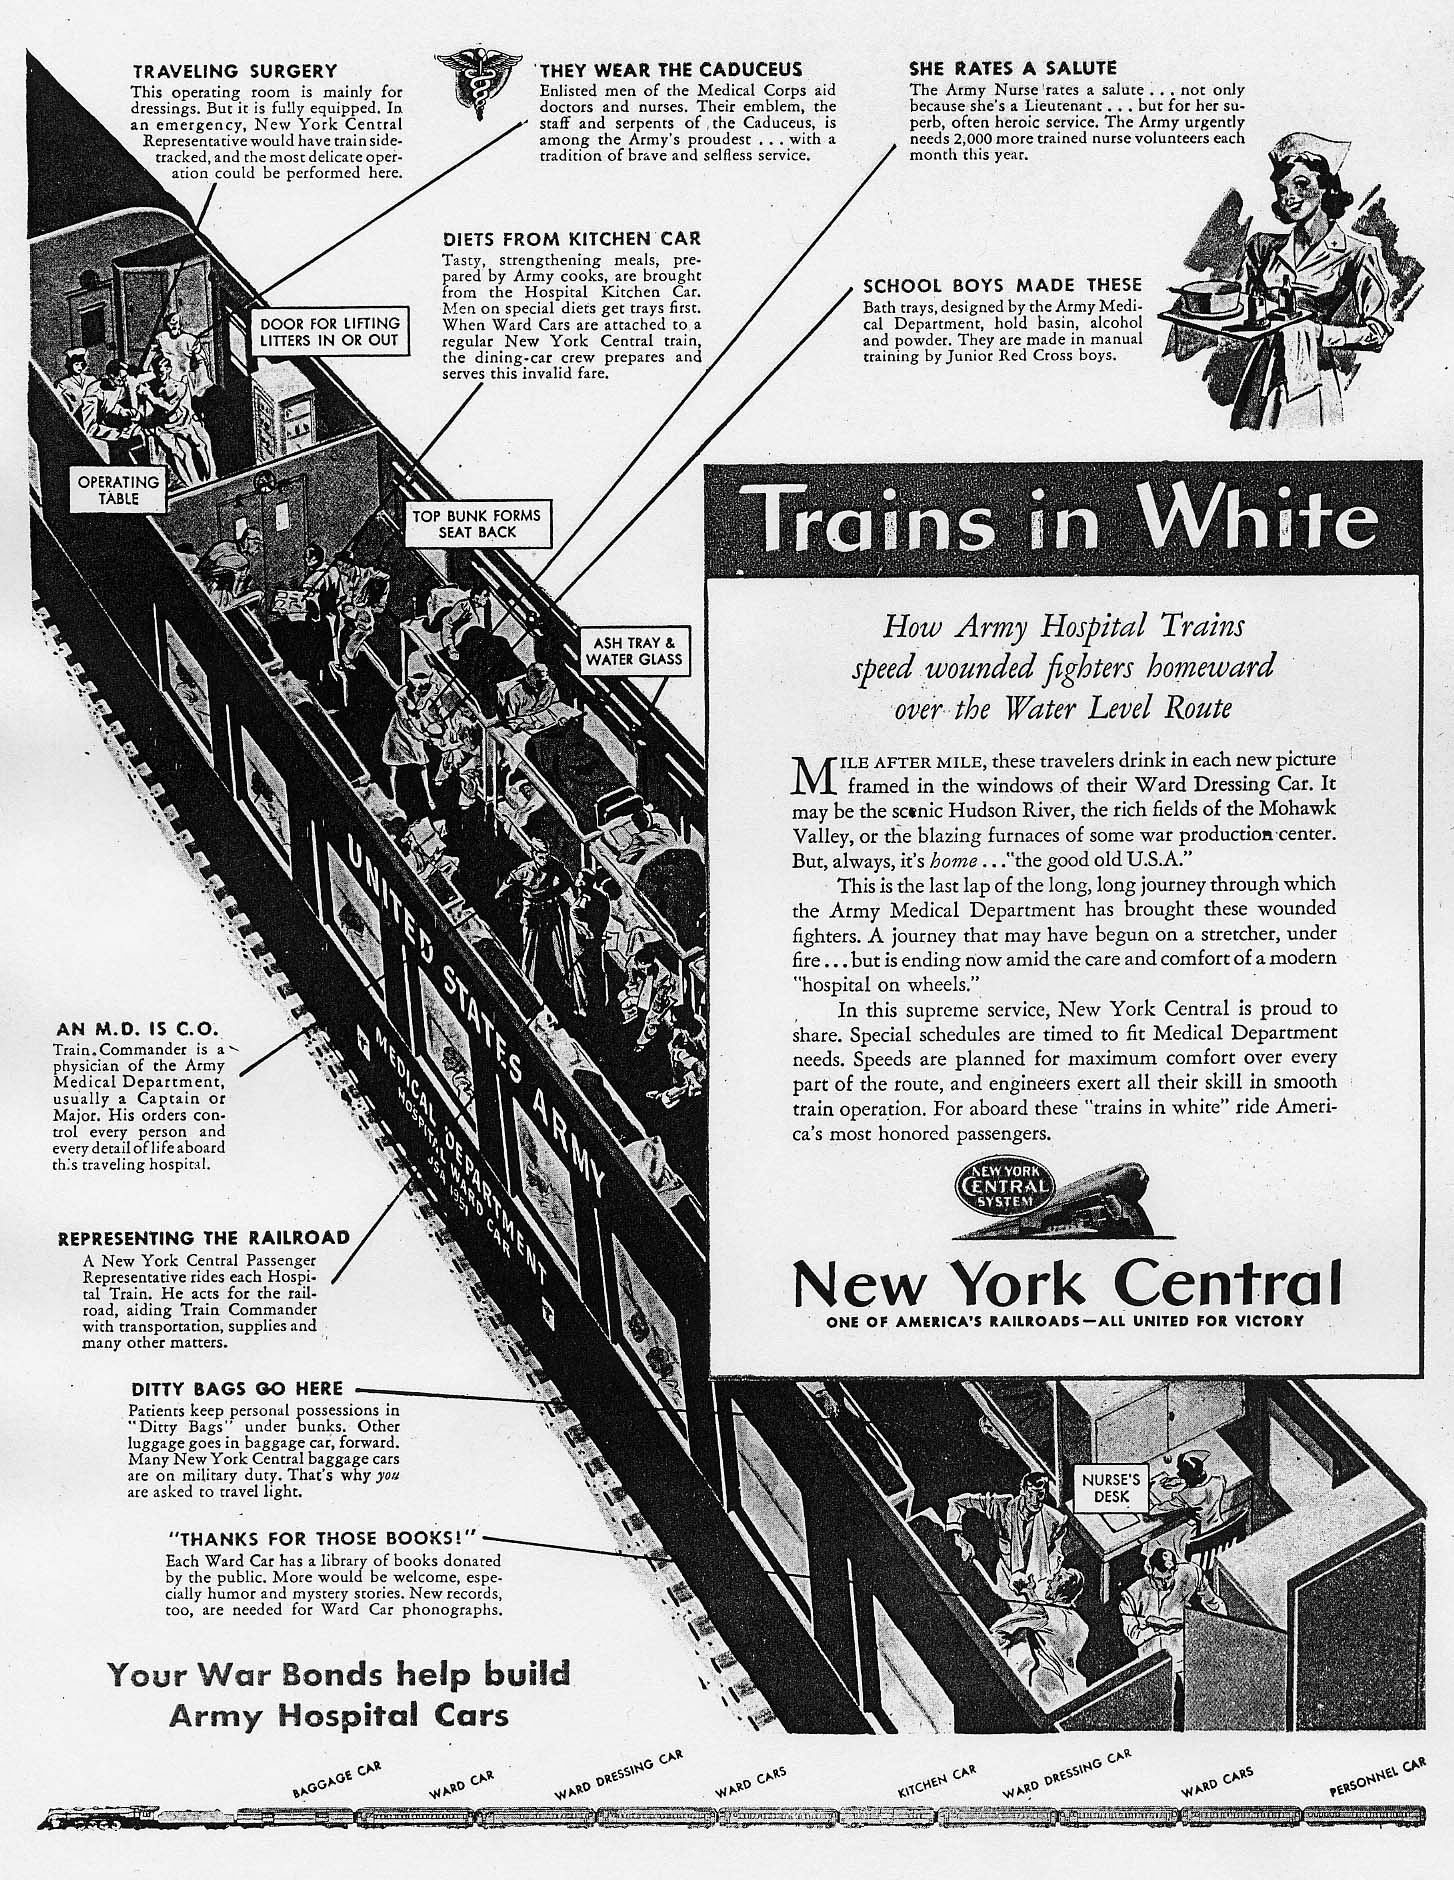 Trains In White ad from New York Central